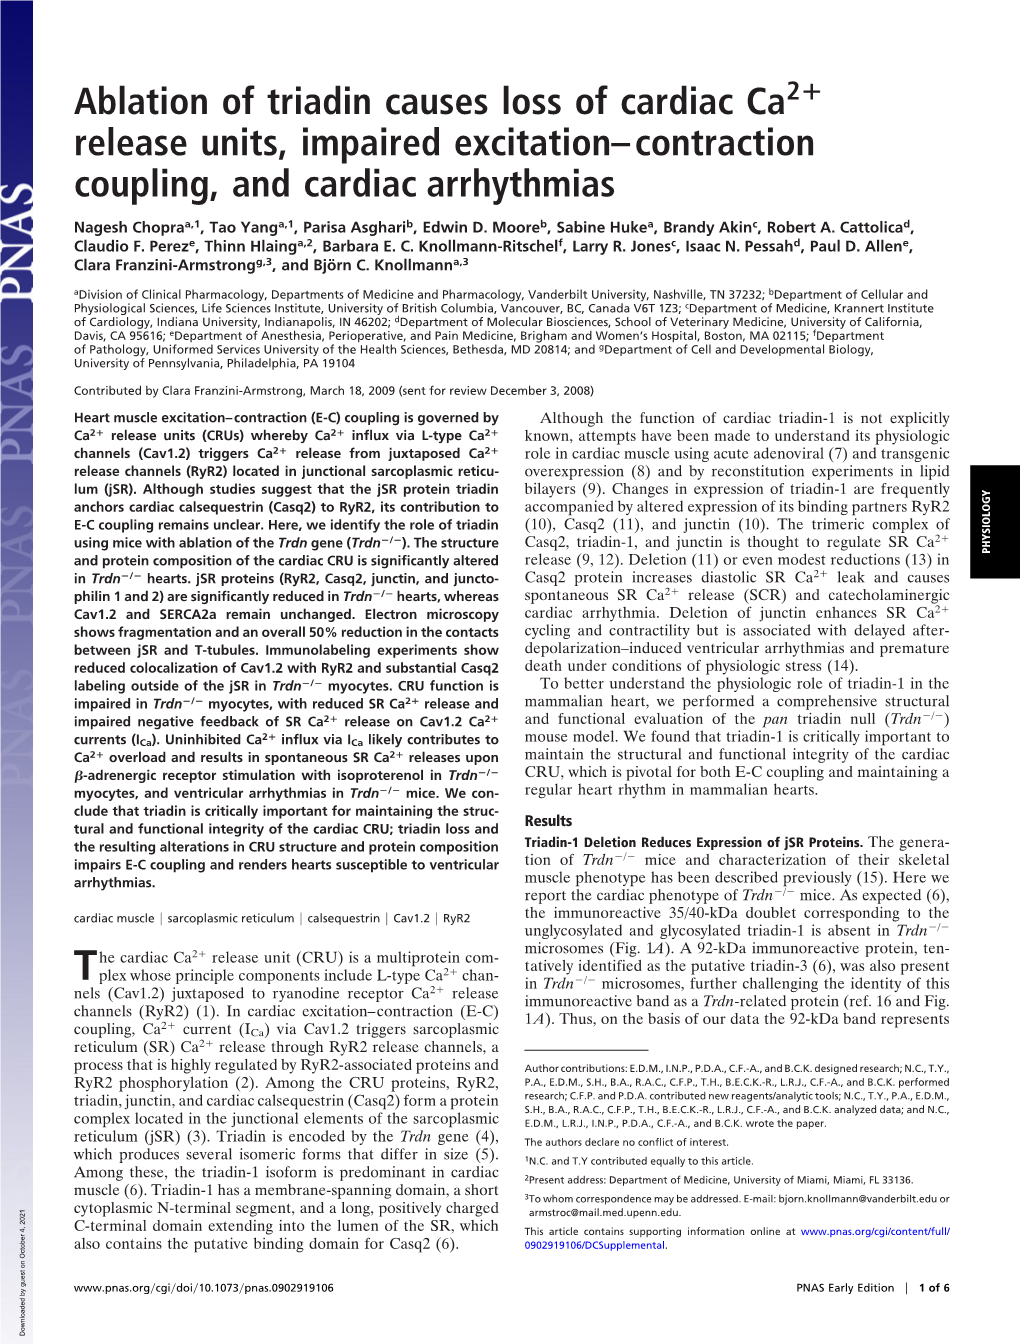 Ablation of Triadin Causes Loss of Cardiac Ca Release Units, Impaired